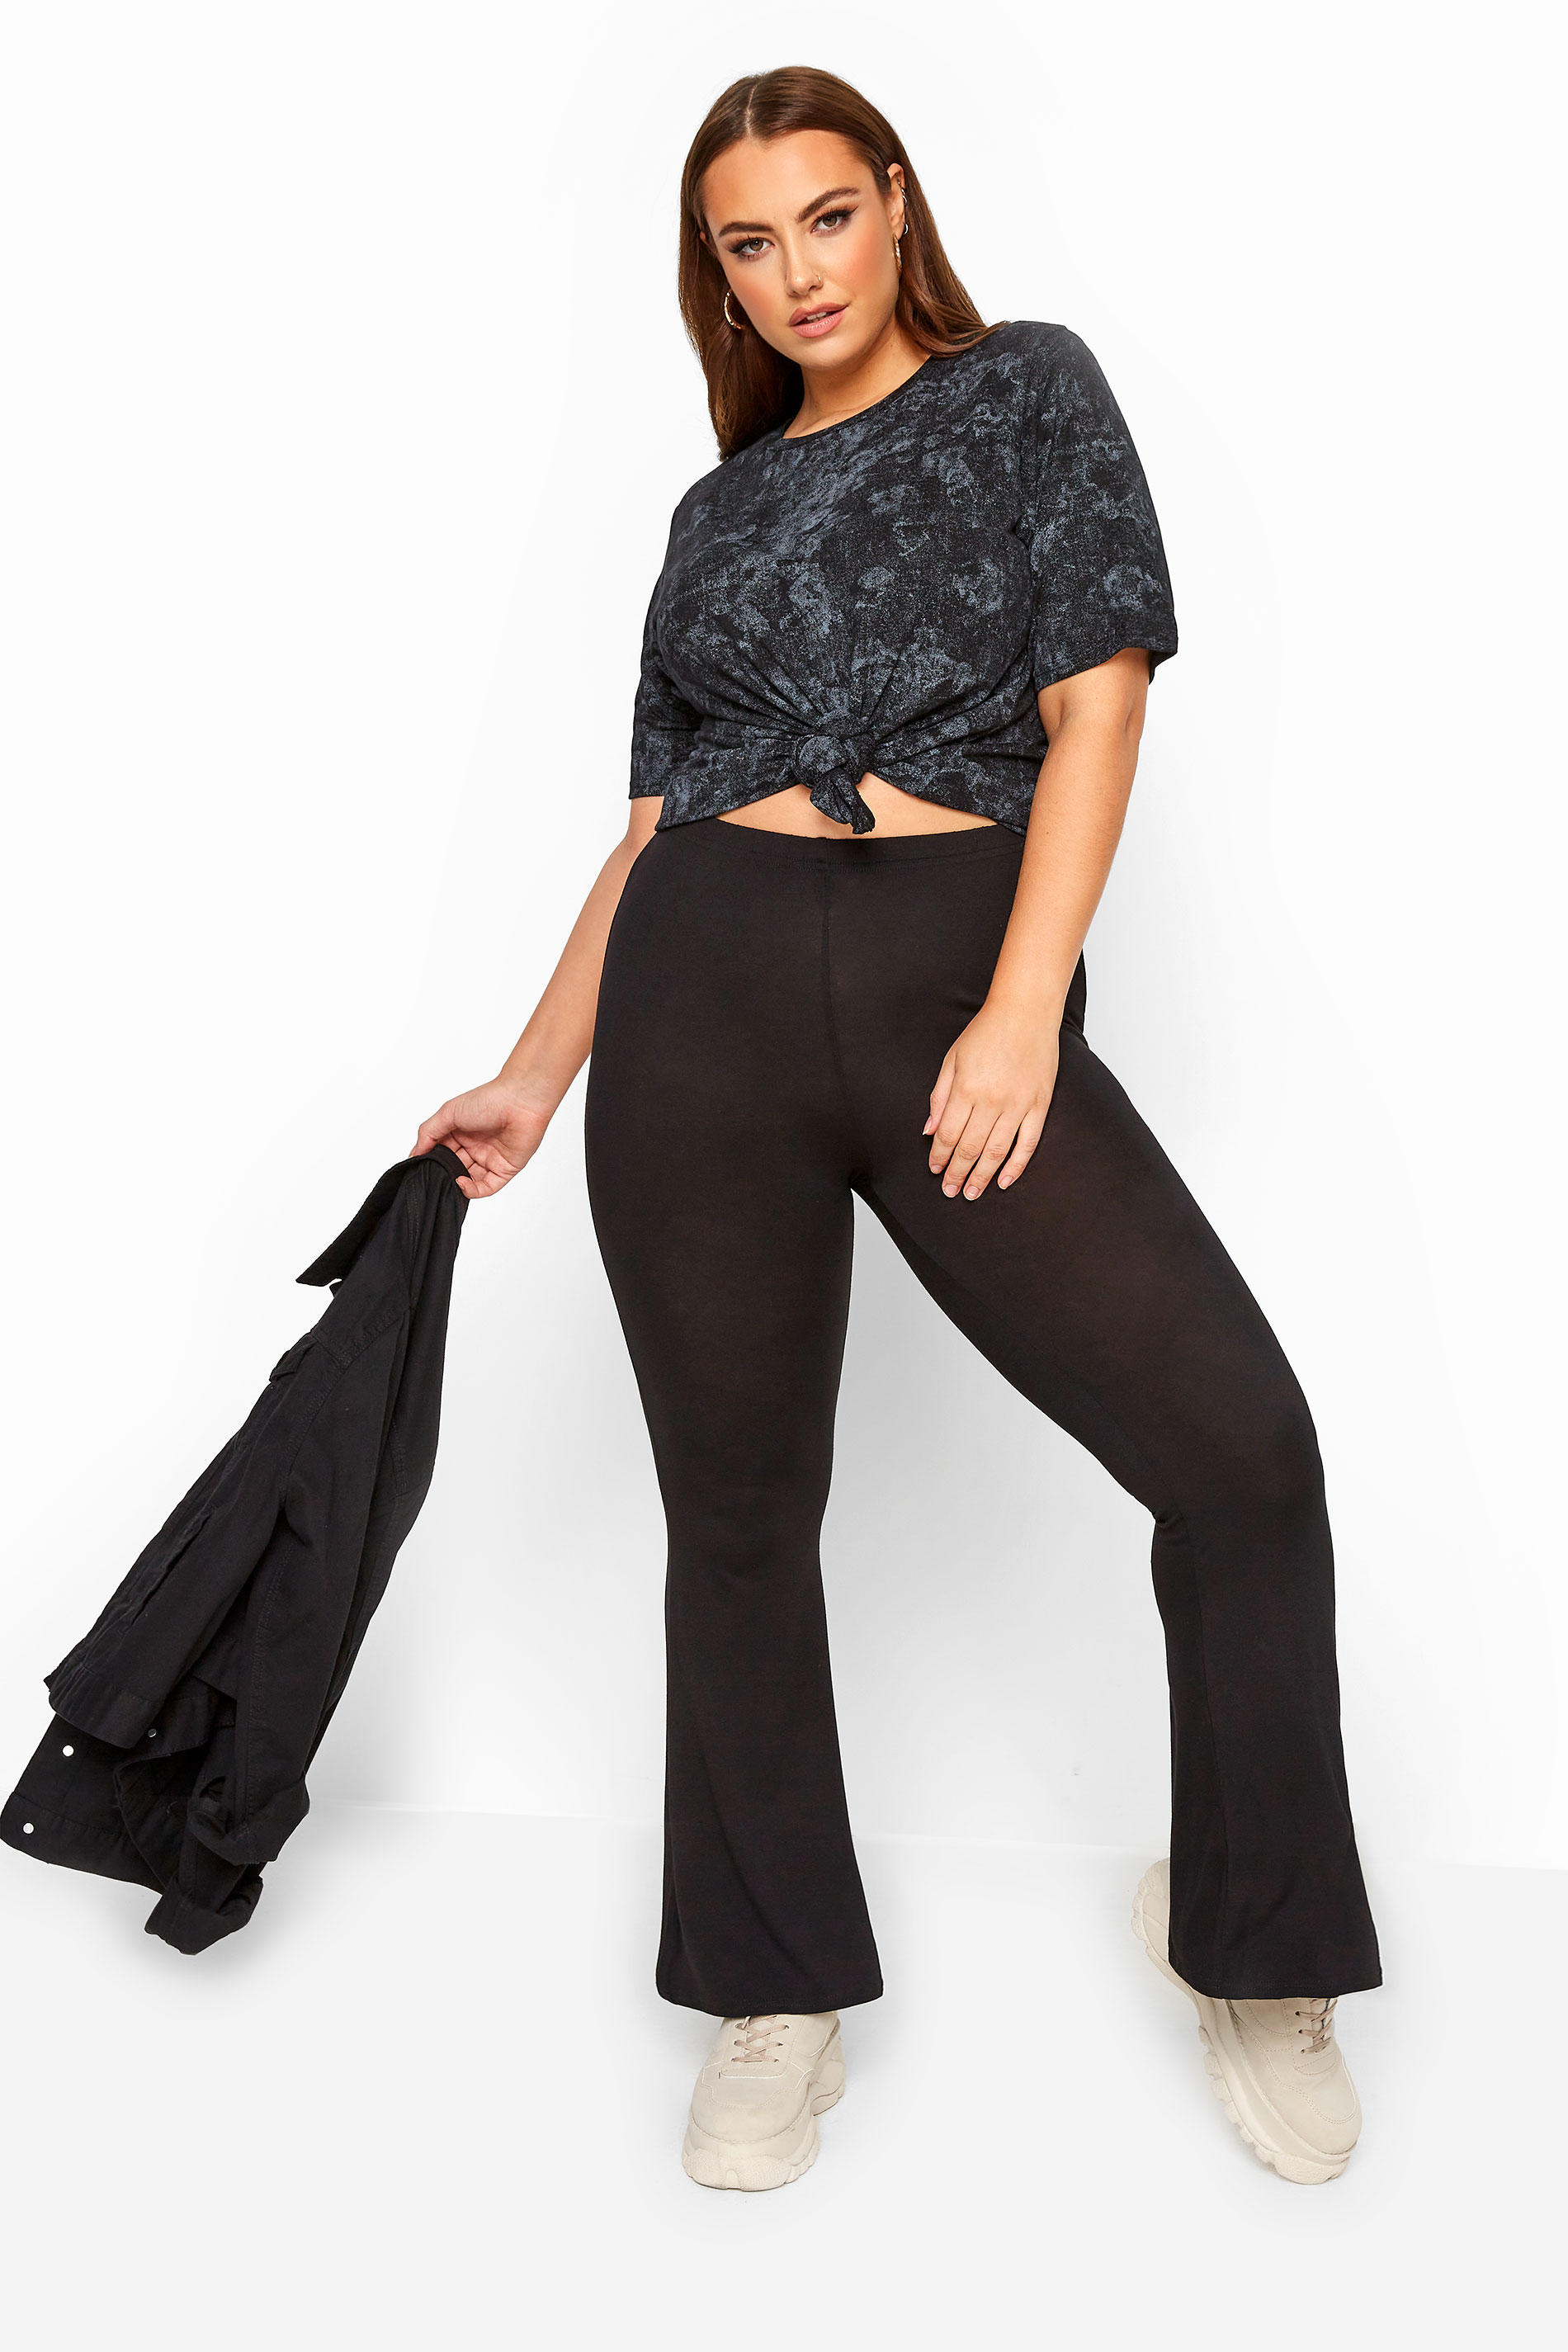 15 Cool Plus Size Outfits With Leggings - Styleoholic